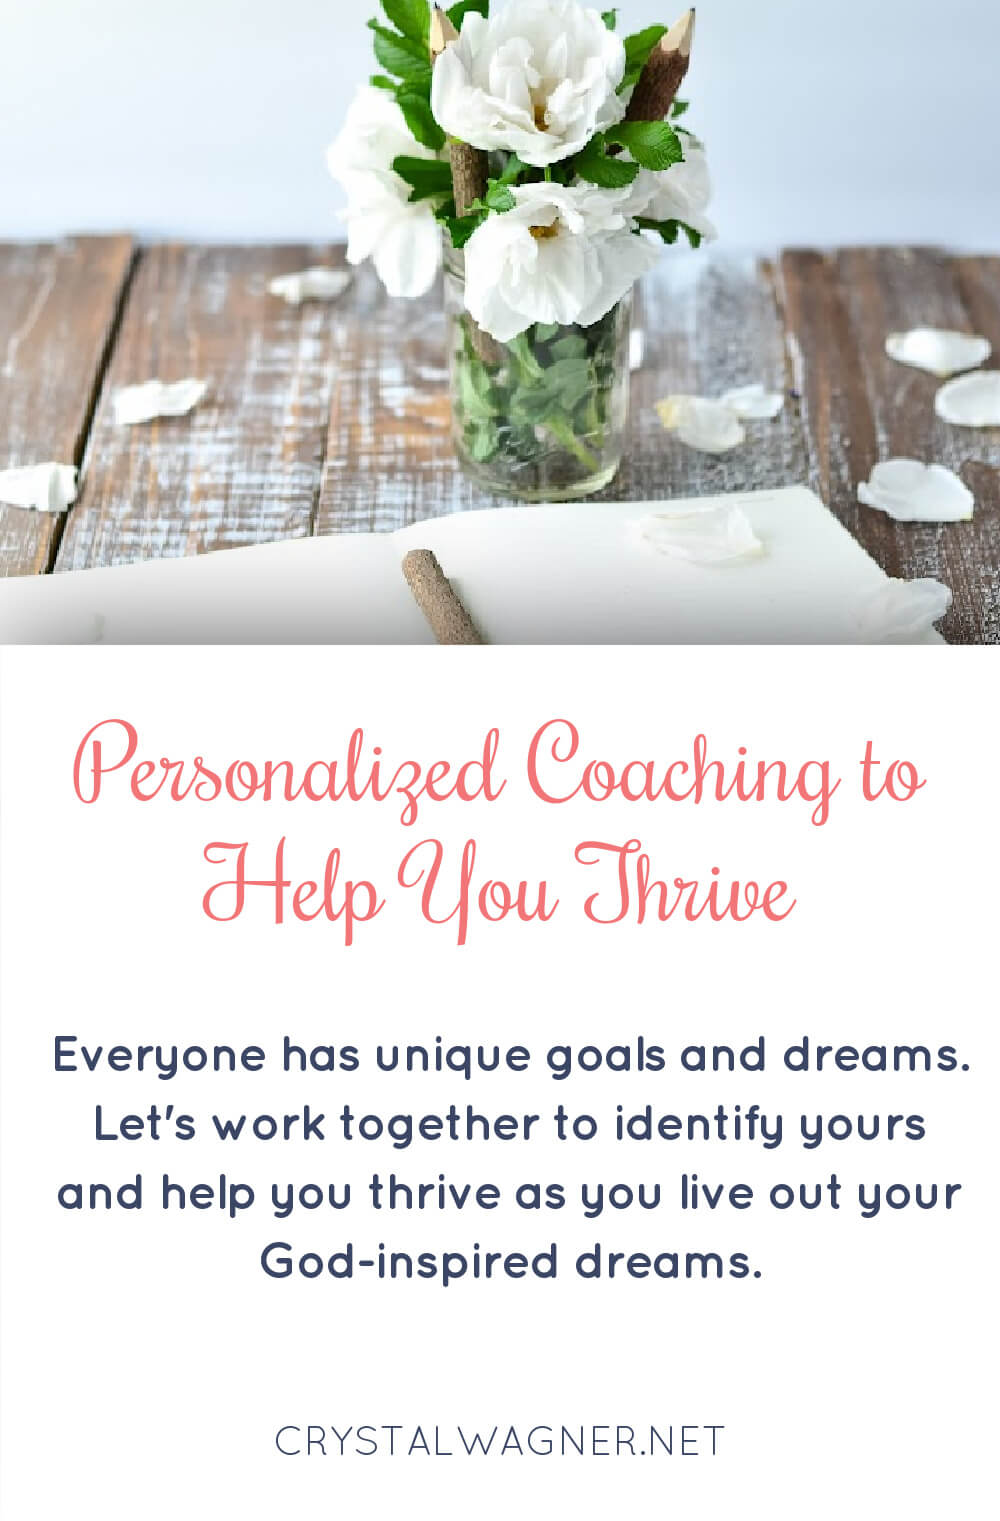 Everyone has unique goals and dreams. Let's work together to identify yours and help you thrive as you live out your God-inspired dreams. via @TriLearning